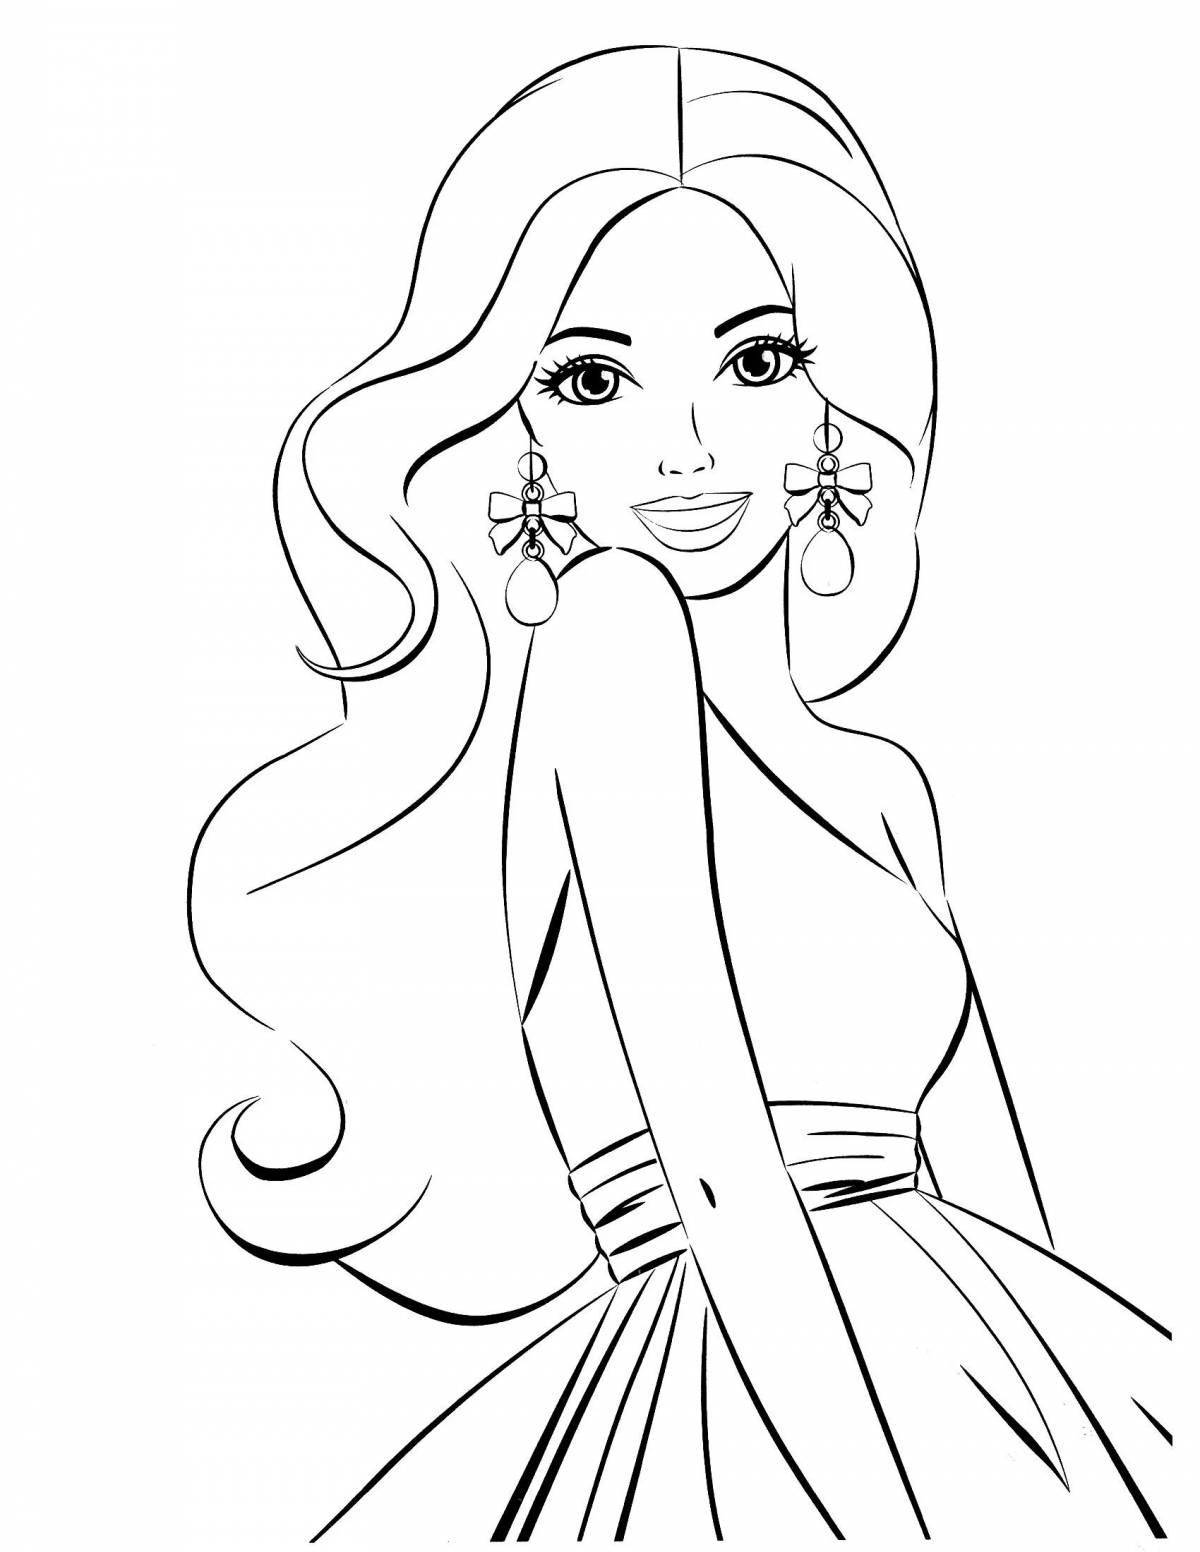 Colorful kyz coloring page